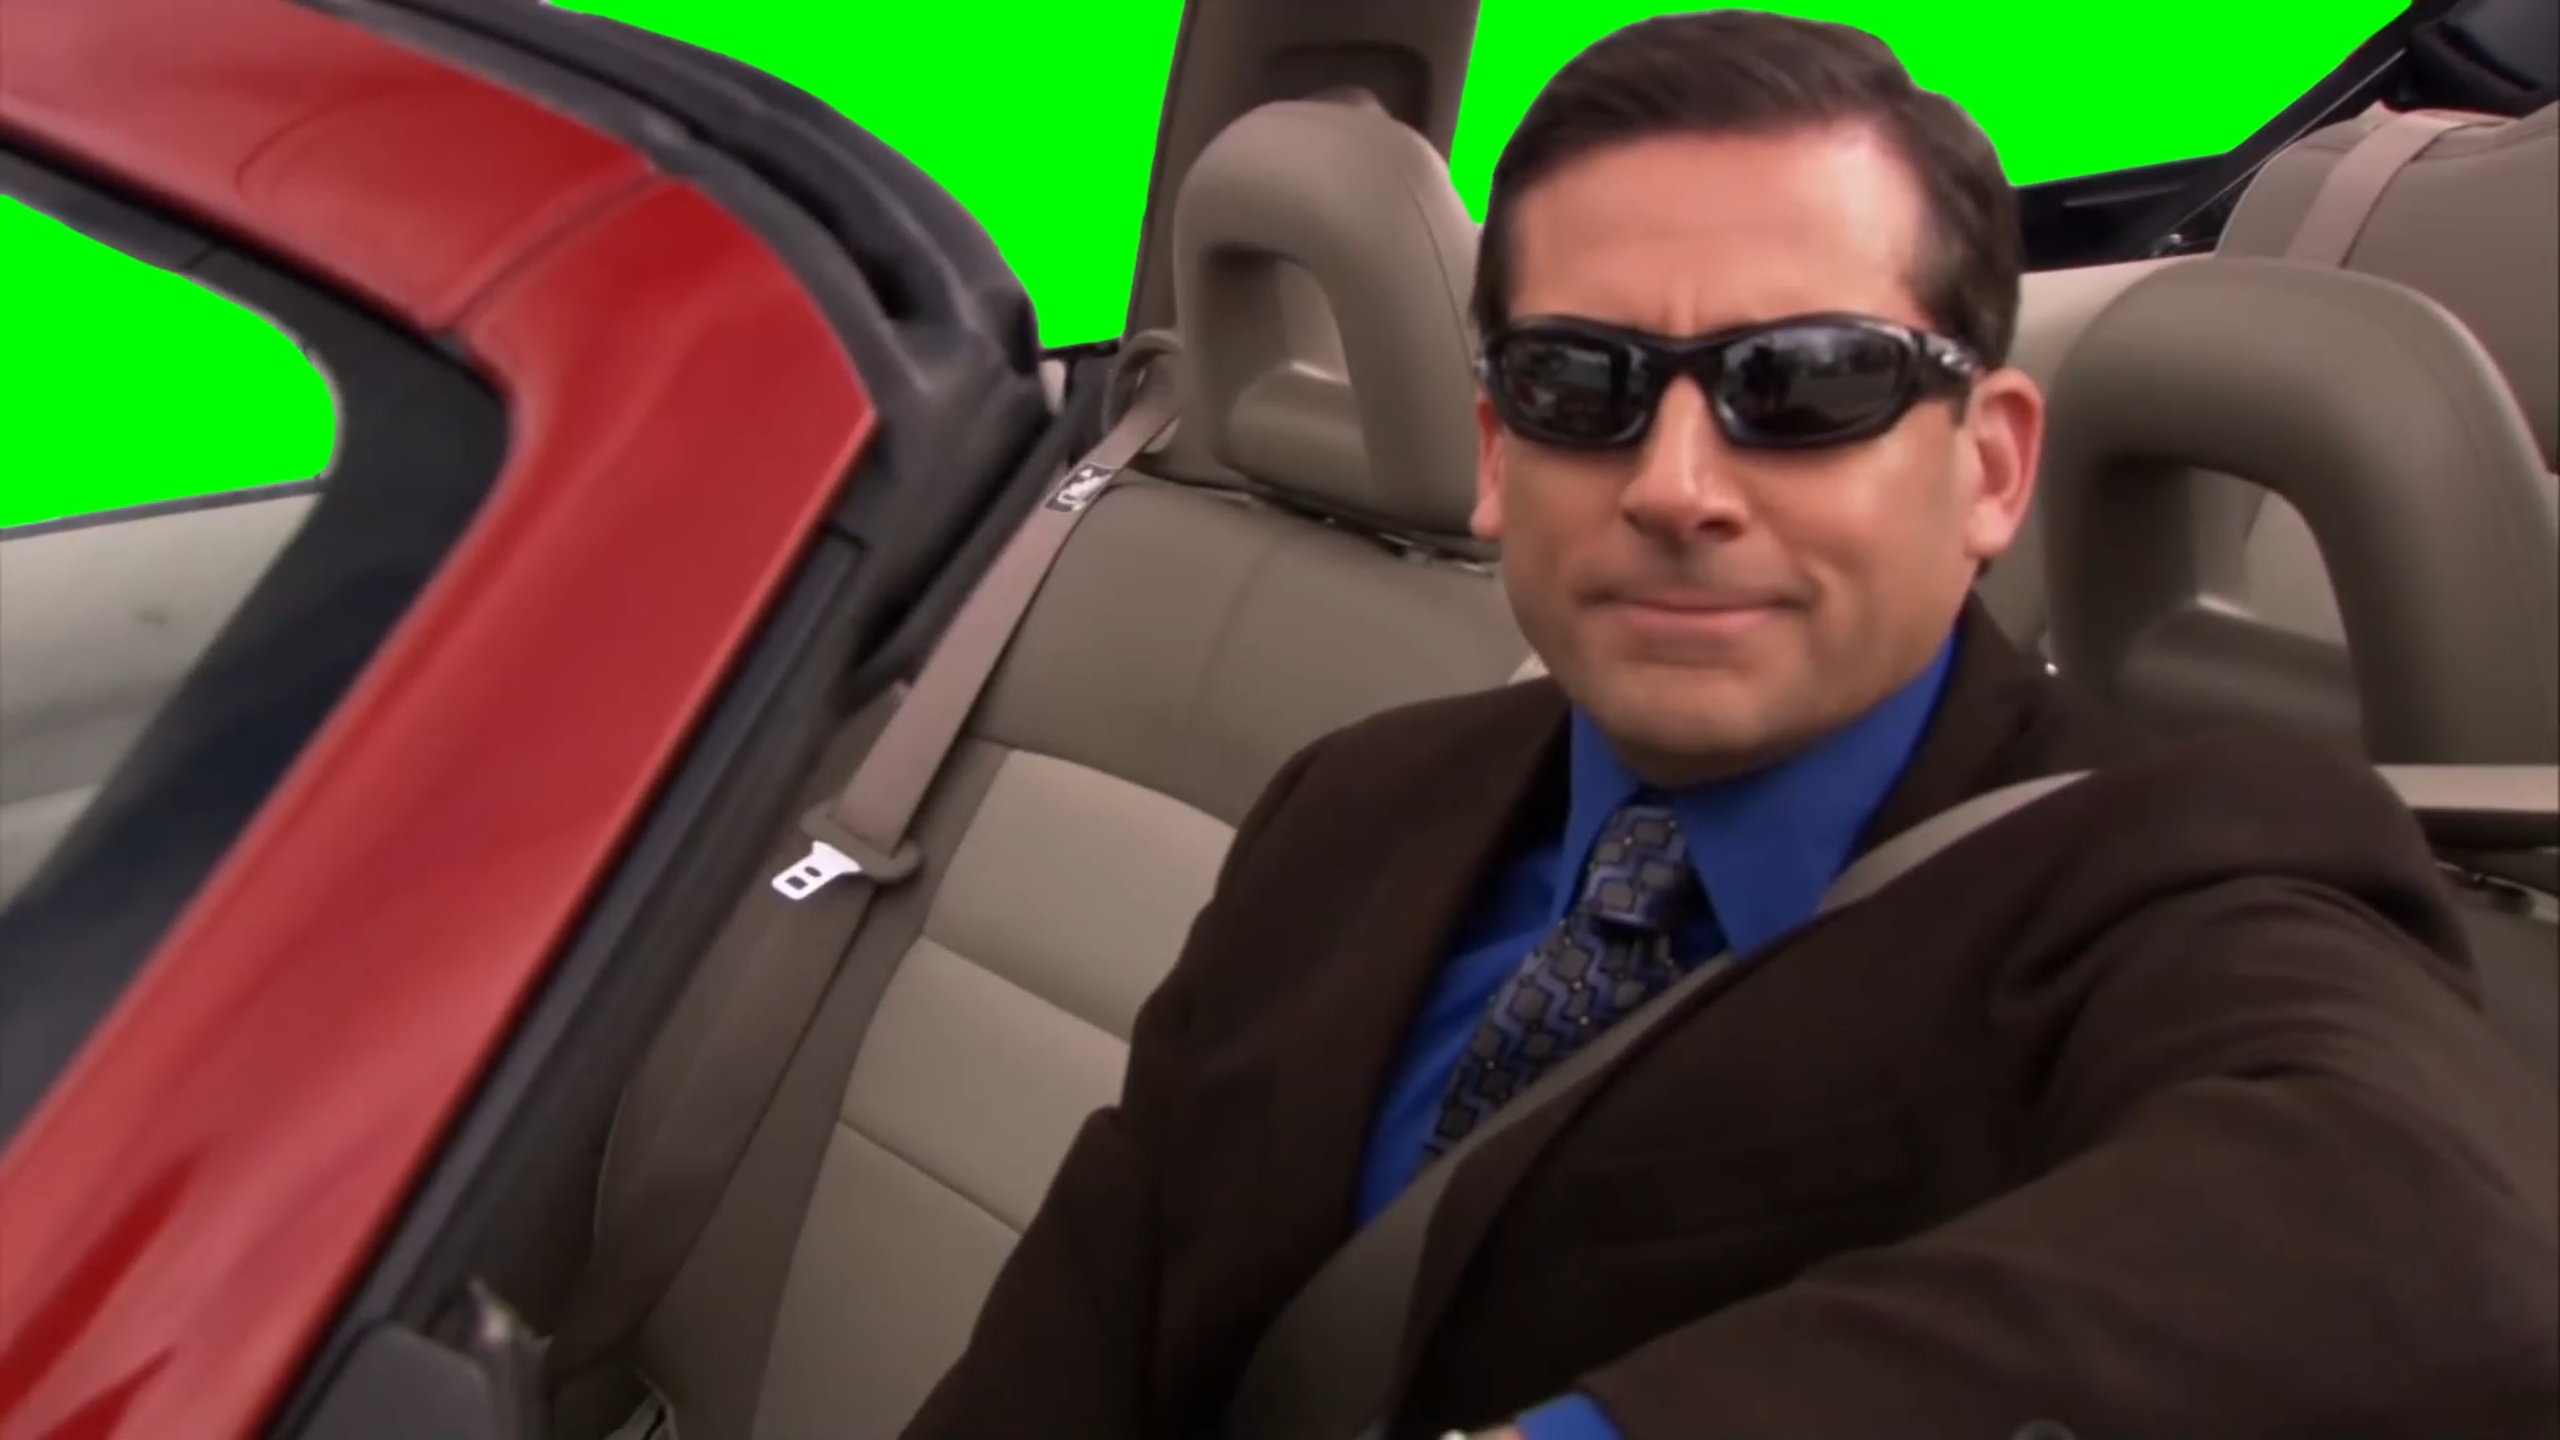 The Office - It's Britney, B*tch! - Michael Scott driving a red car (Green Screen)